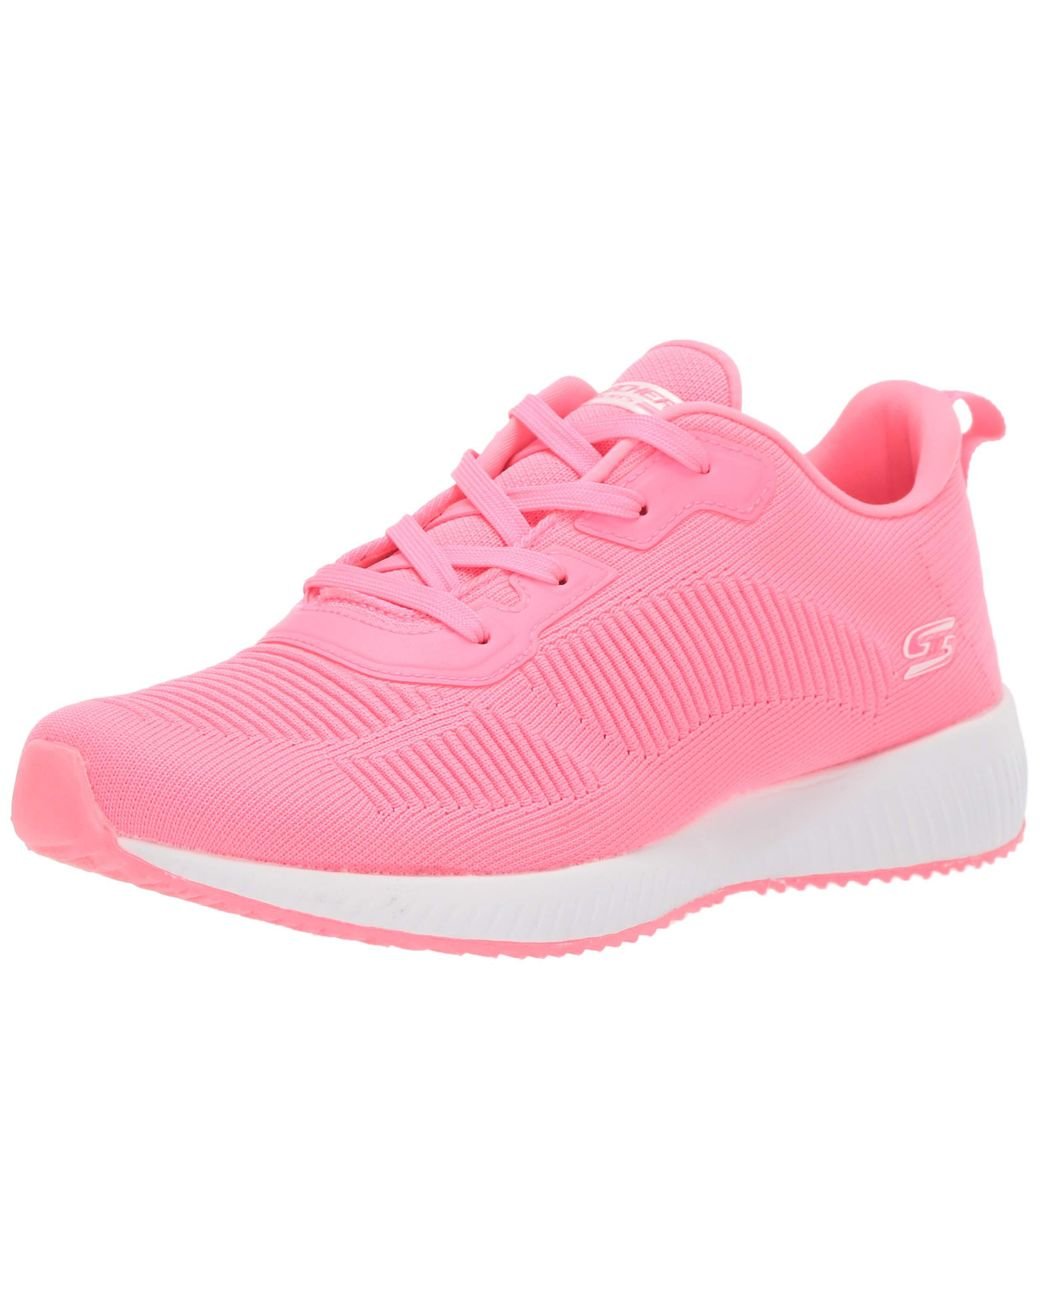 Skechers Bobs Bobs Squad-glow Rider Sneaker in Neon Pink (Pink) | Lyst